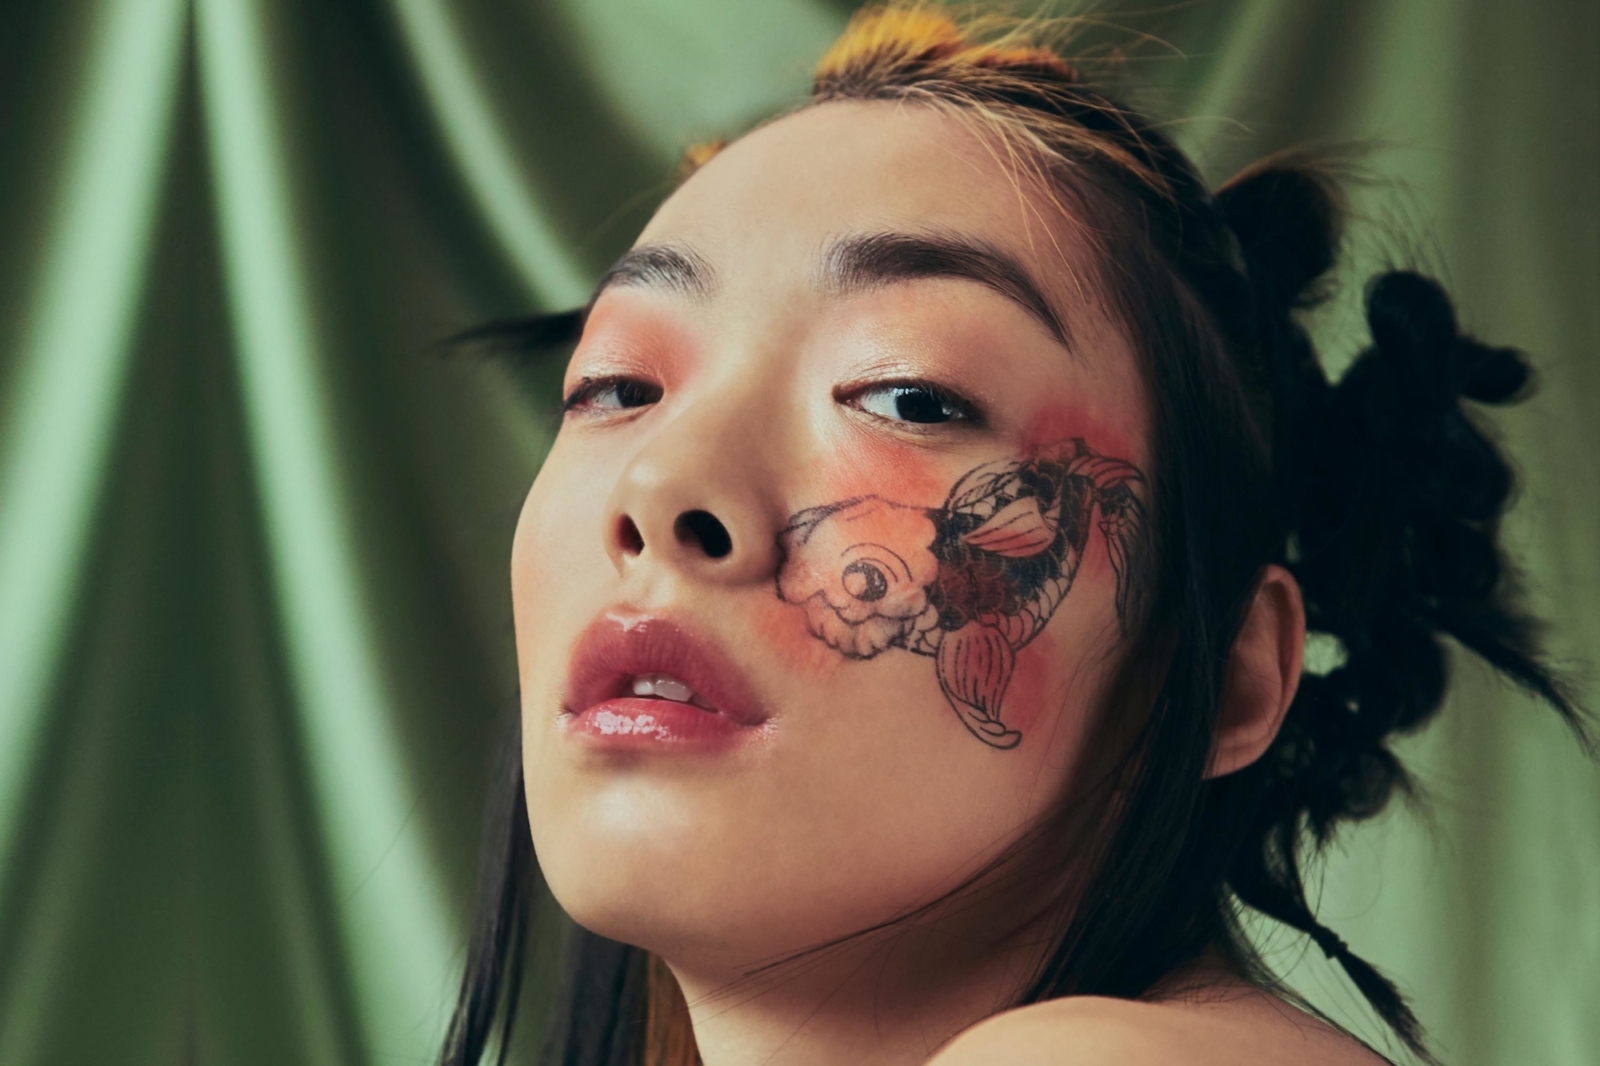 Rina Sawayama: "Us pop girls are really trying to lift 2020 in the only way we can!"